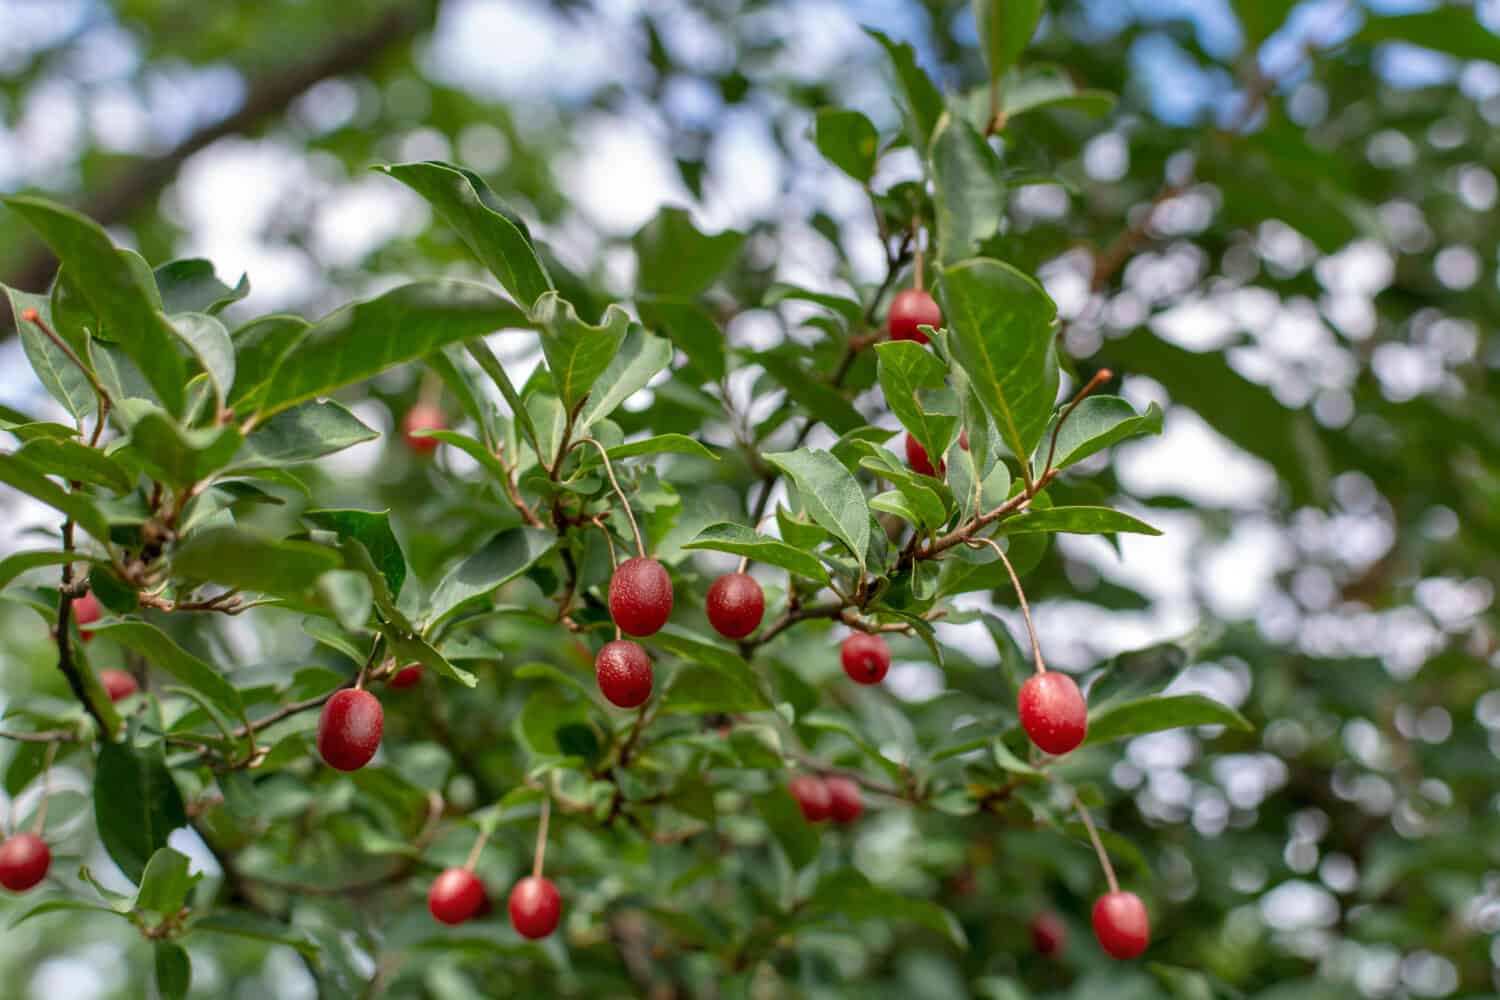 Elaeagnus Umbellata  ( Gumi or Cherry silverberry, silverberry oleaster) . Ripe red  berries of Japanese silverberry fruit bush growing on a branch